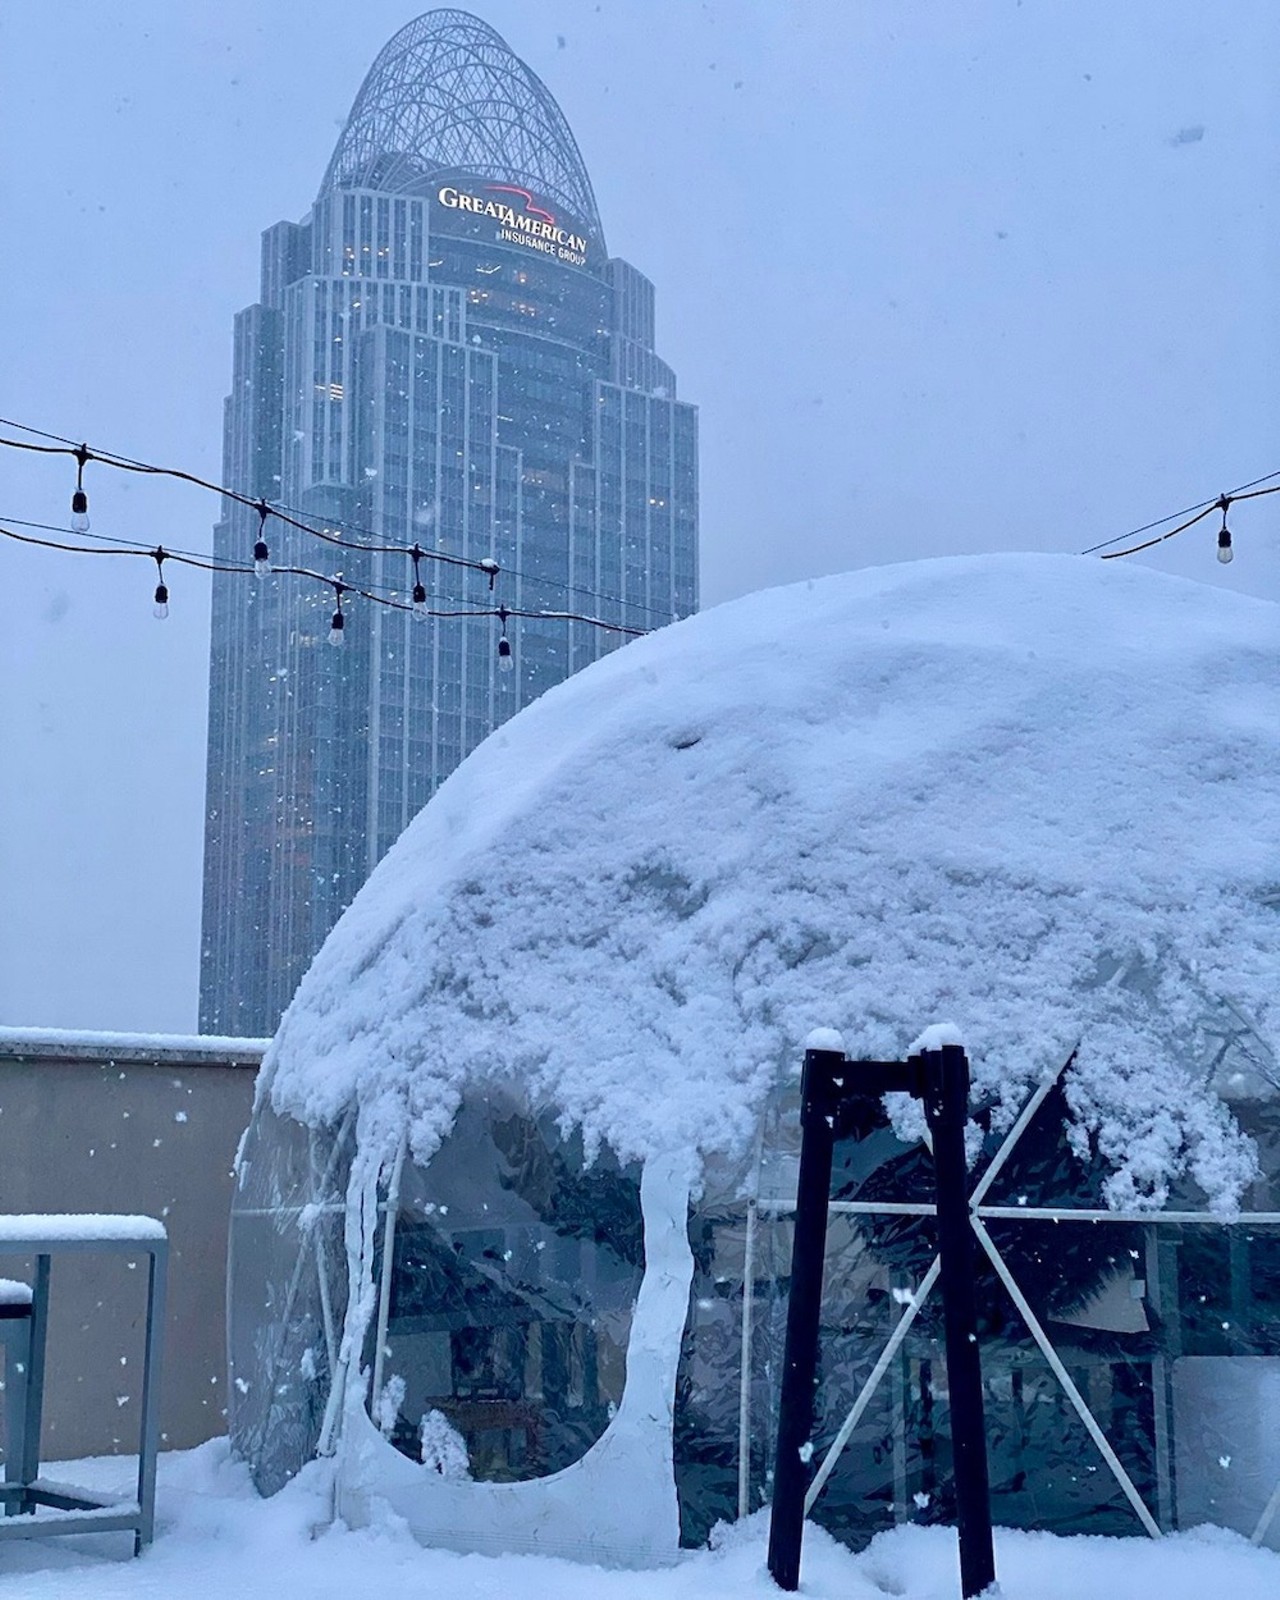 AC Upper Deck
135 Joe Nuxhall Way, Downtown
Get a birds-eye view of The Banks from the igloos at the AC Upper Deck. Each can seat eight people and includes a heater. Igloos are $32 to reserve, and there is a food and drink minimum.